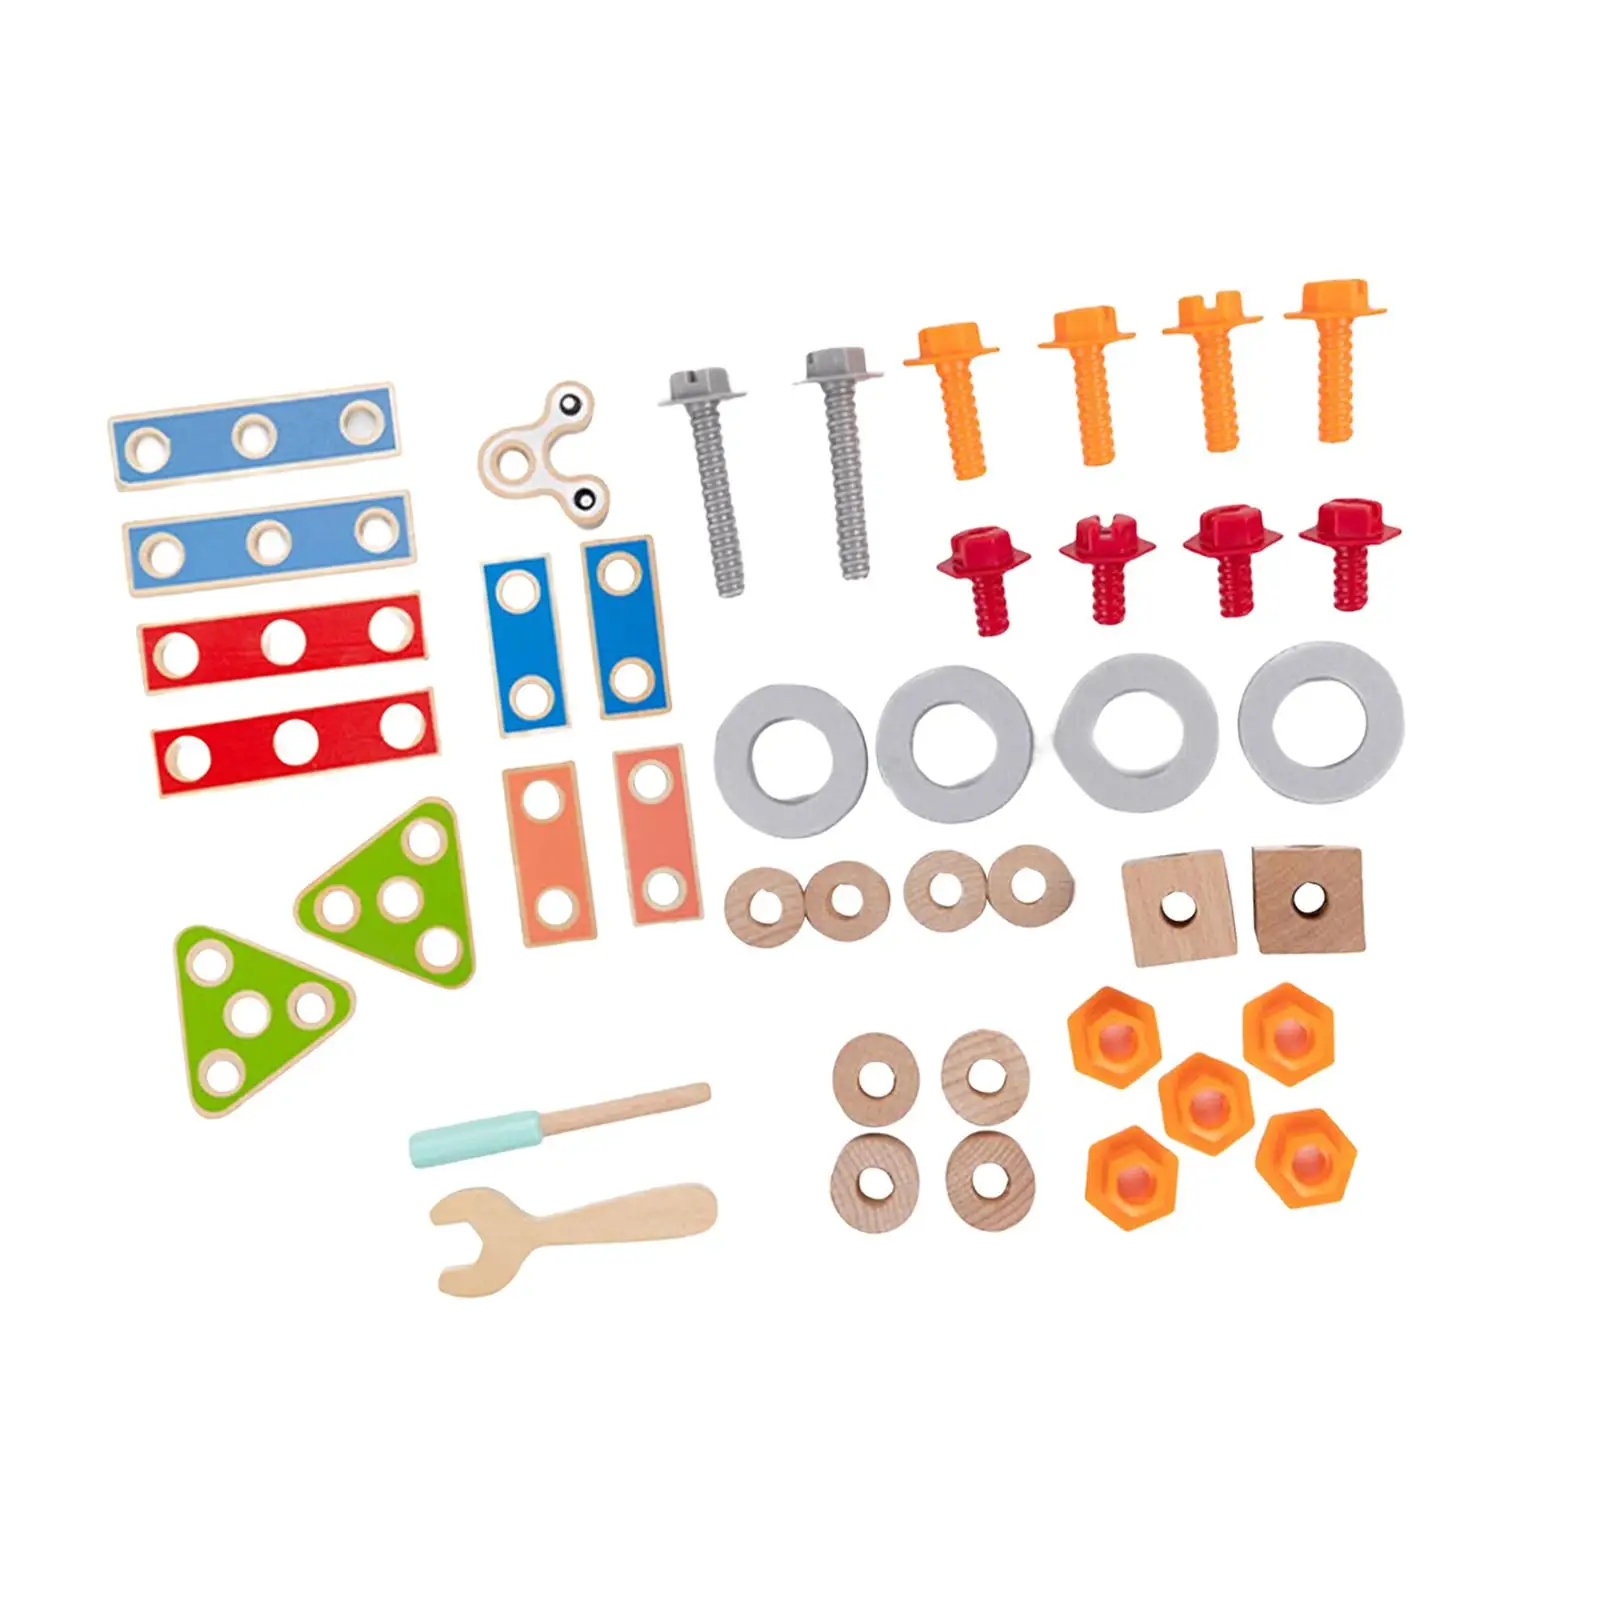 Wood Screw and Nut Set Uilding Blocks Construction Kit for Birthday Gift